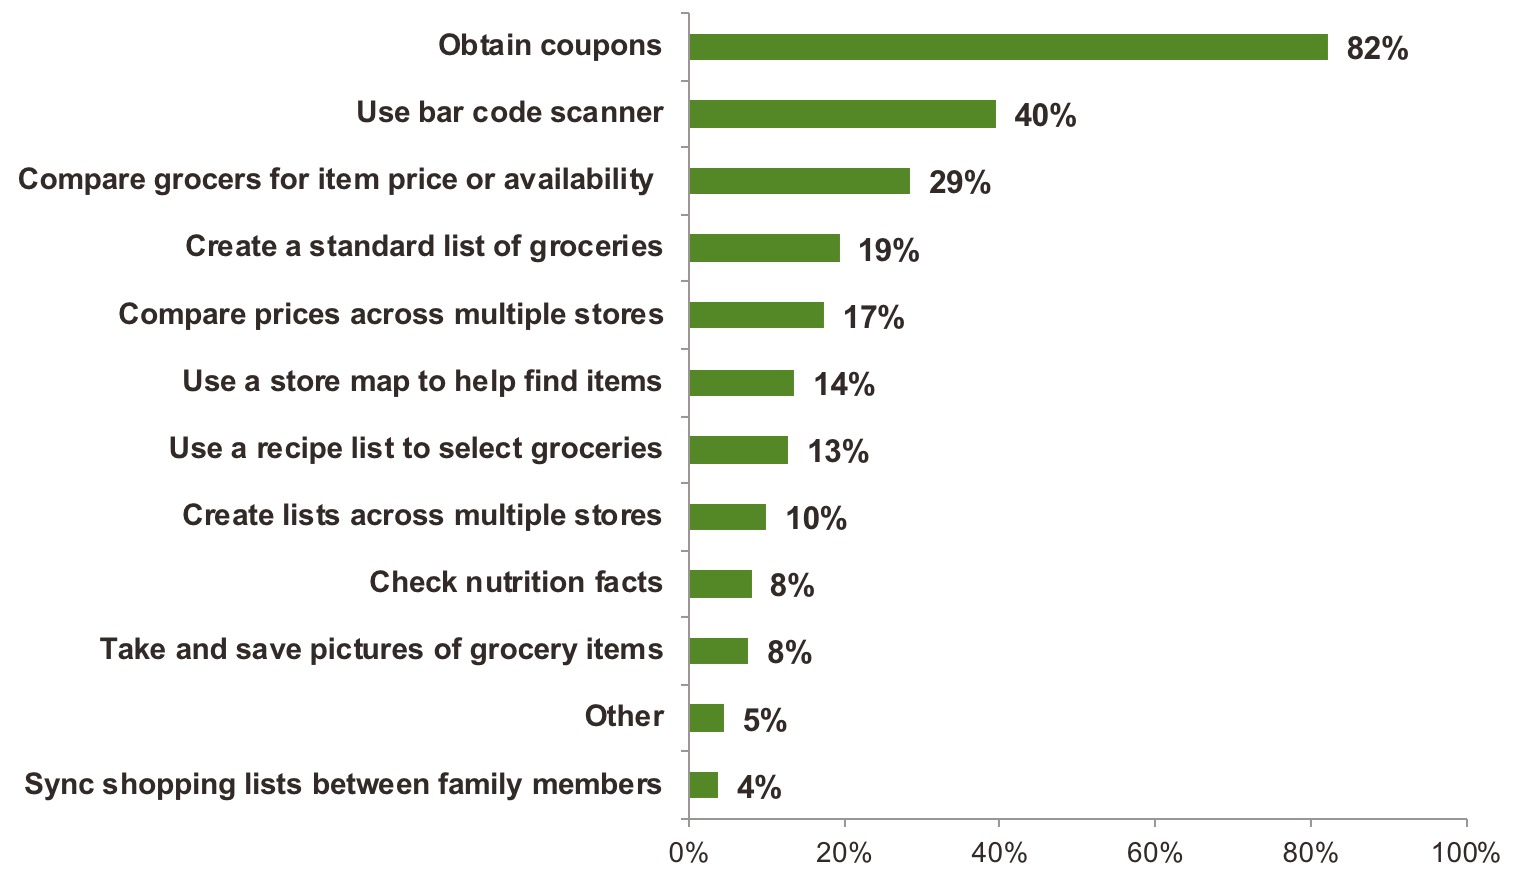 Graph 7: Most Popular Grocery Mobile App Uses